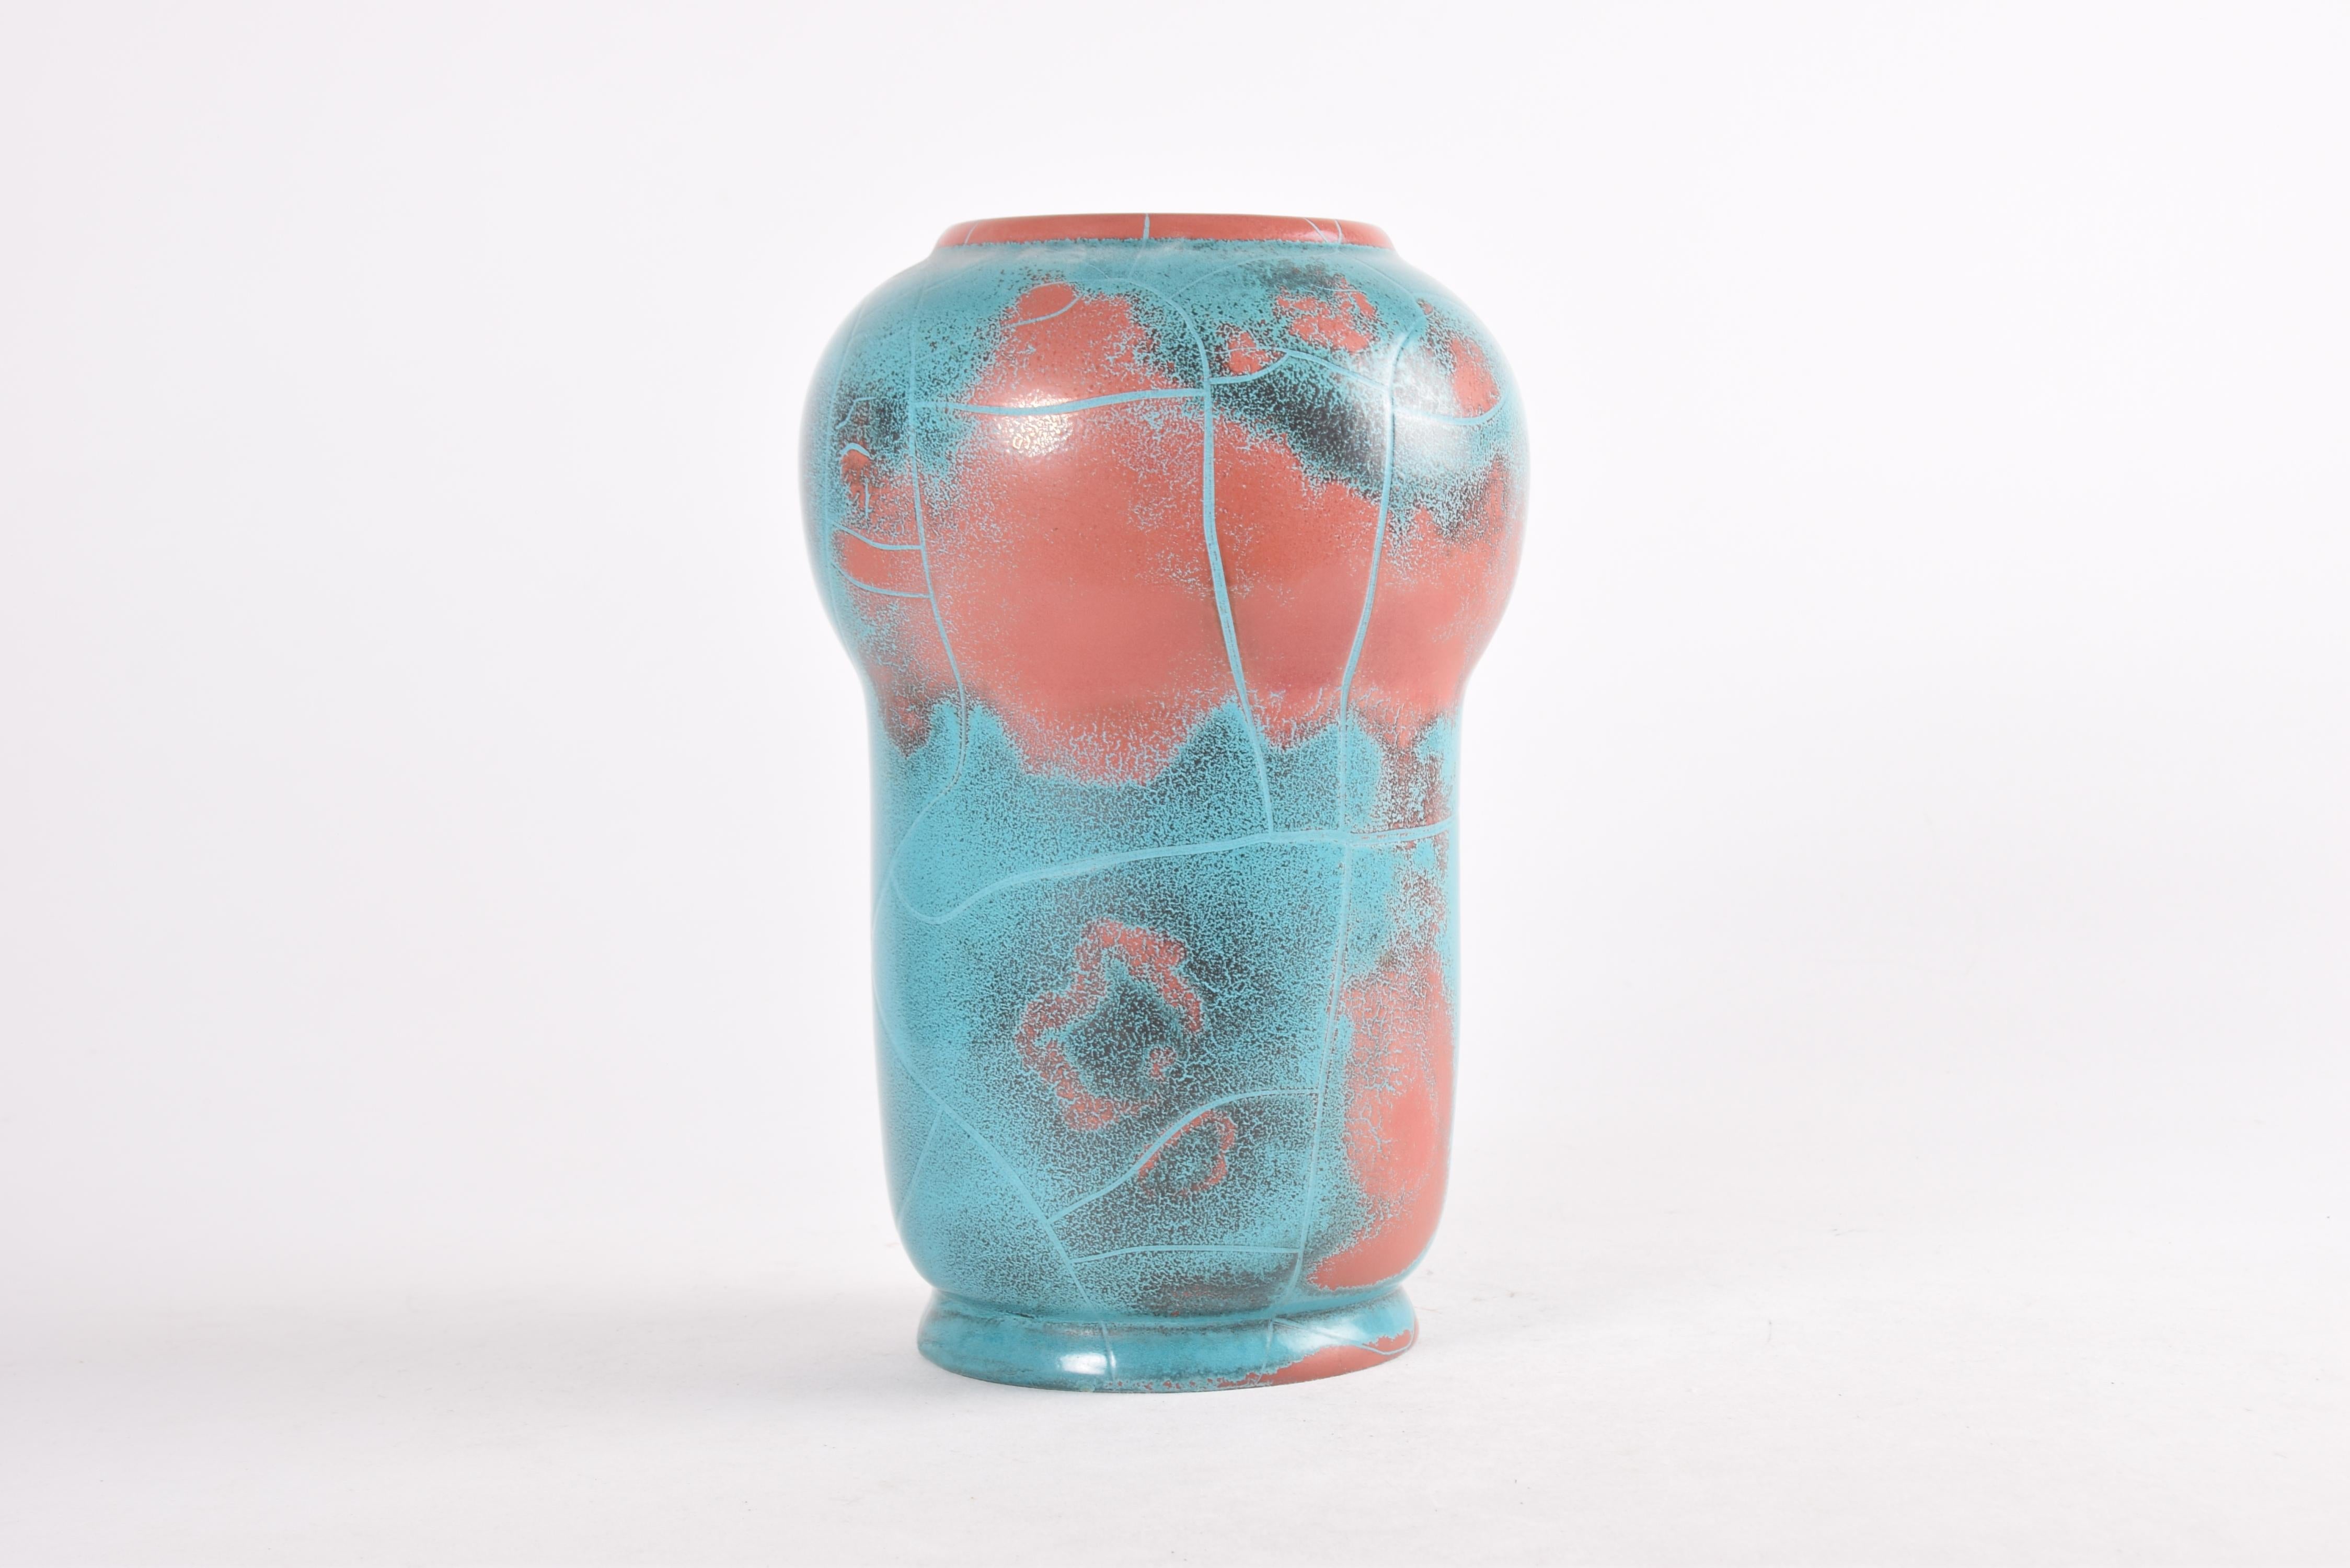 Rare tall vase from the Danish ceramic manufacturer P. Ibsens Enke, which was situated in Copenhagen. Made ca. 1930s.

The glaze is turquoise and red and shows a crackle effect. It was developed for P. Ipsens Enke by the ceramist Axel Sørensen